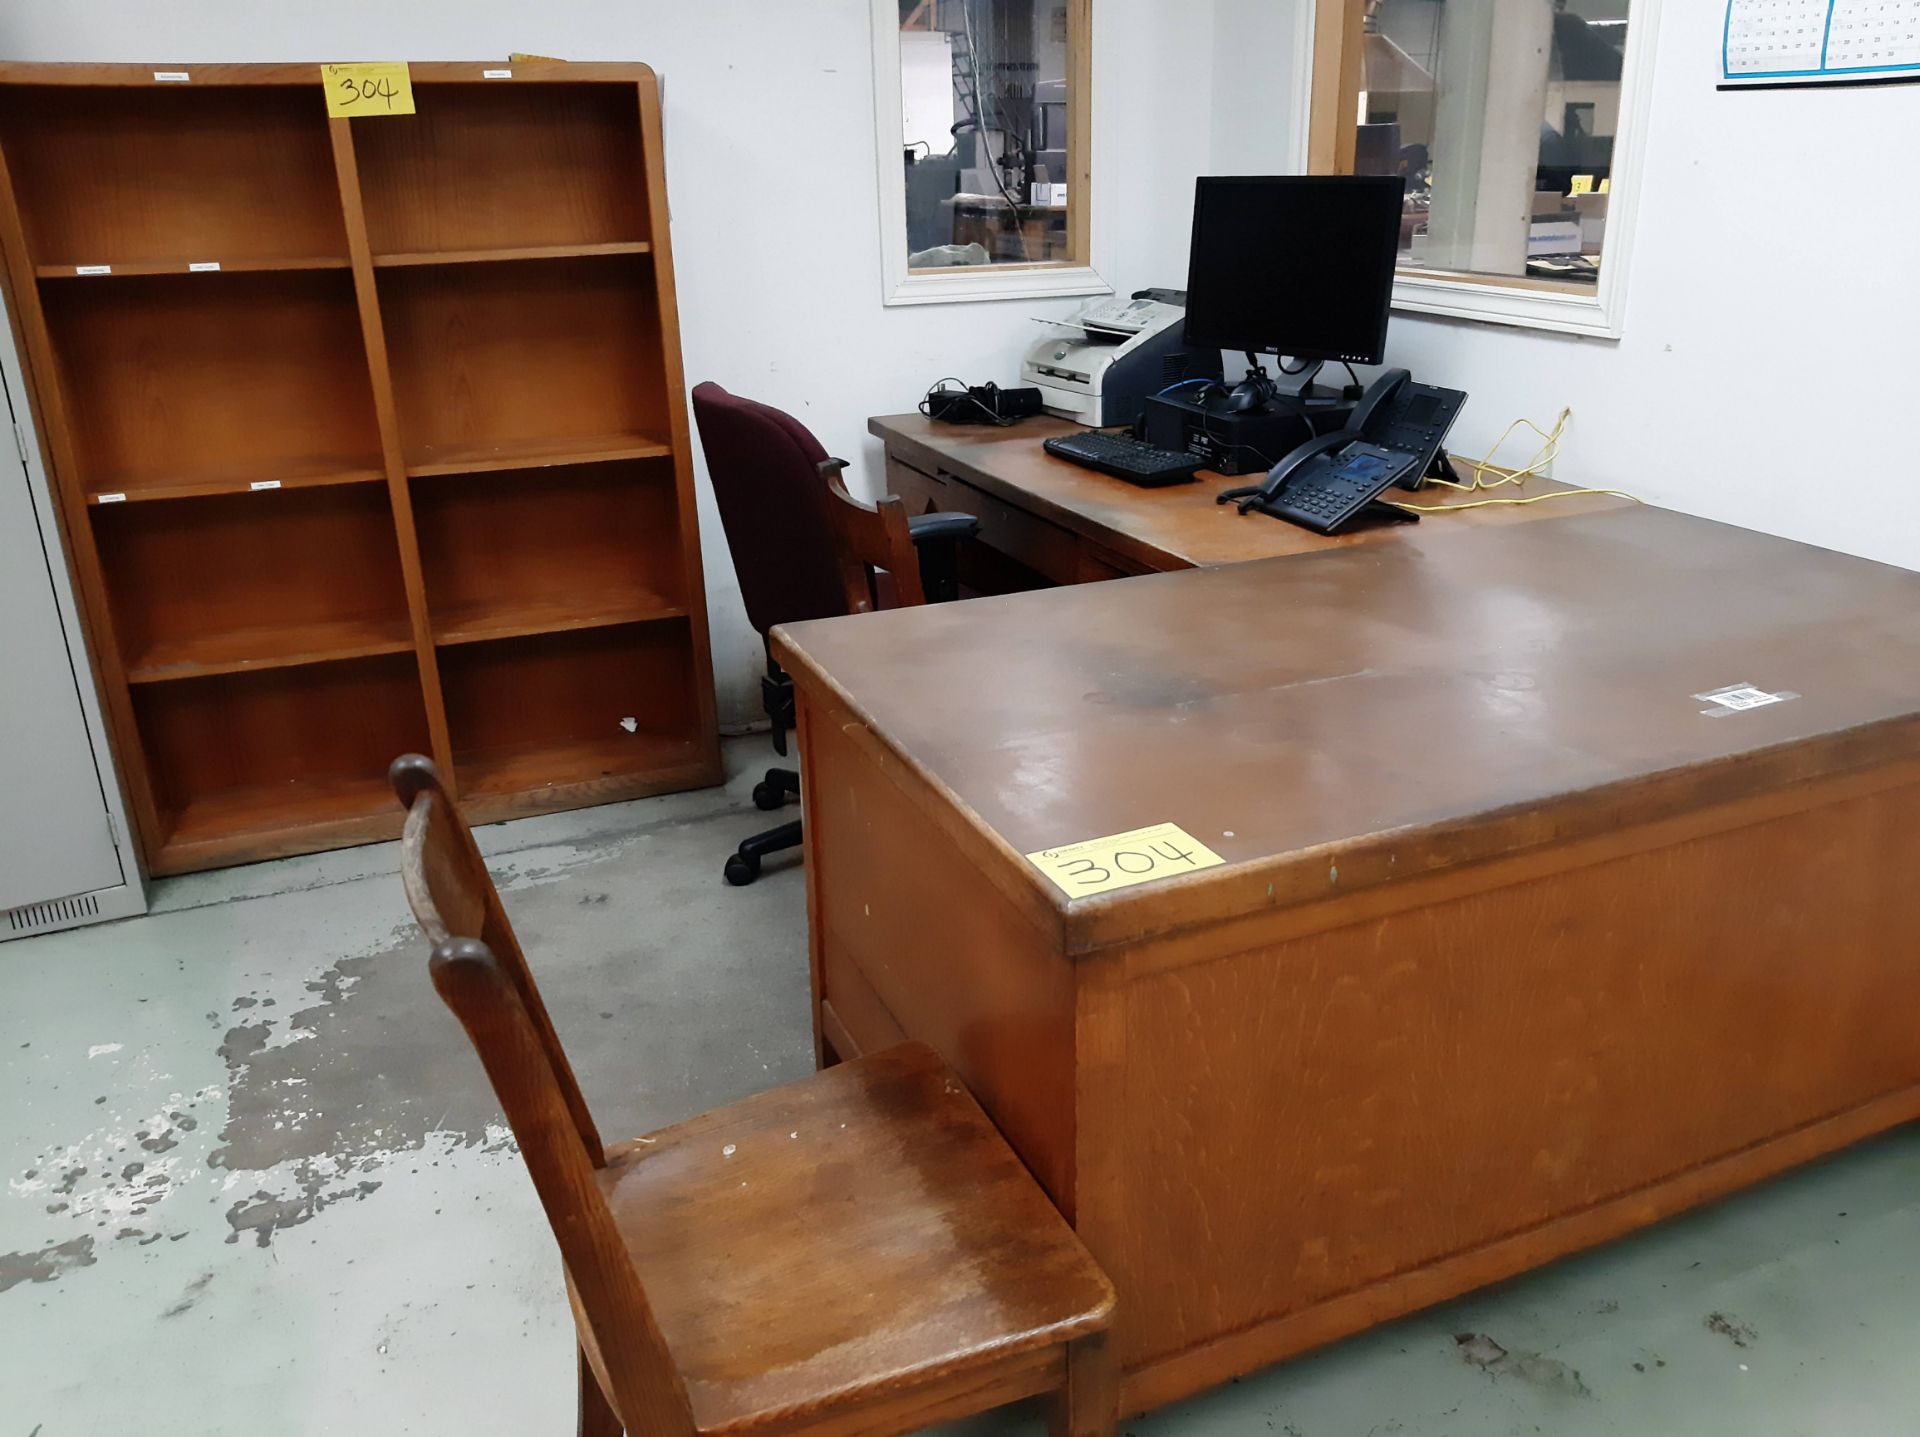 LOT OF FURNITURE, (2) DESKS, (3) CHAIRS, (2) BOOKCASES